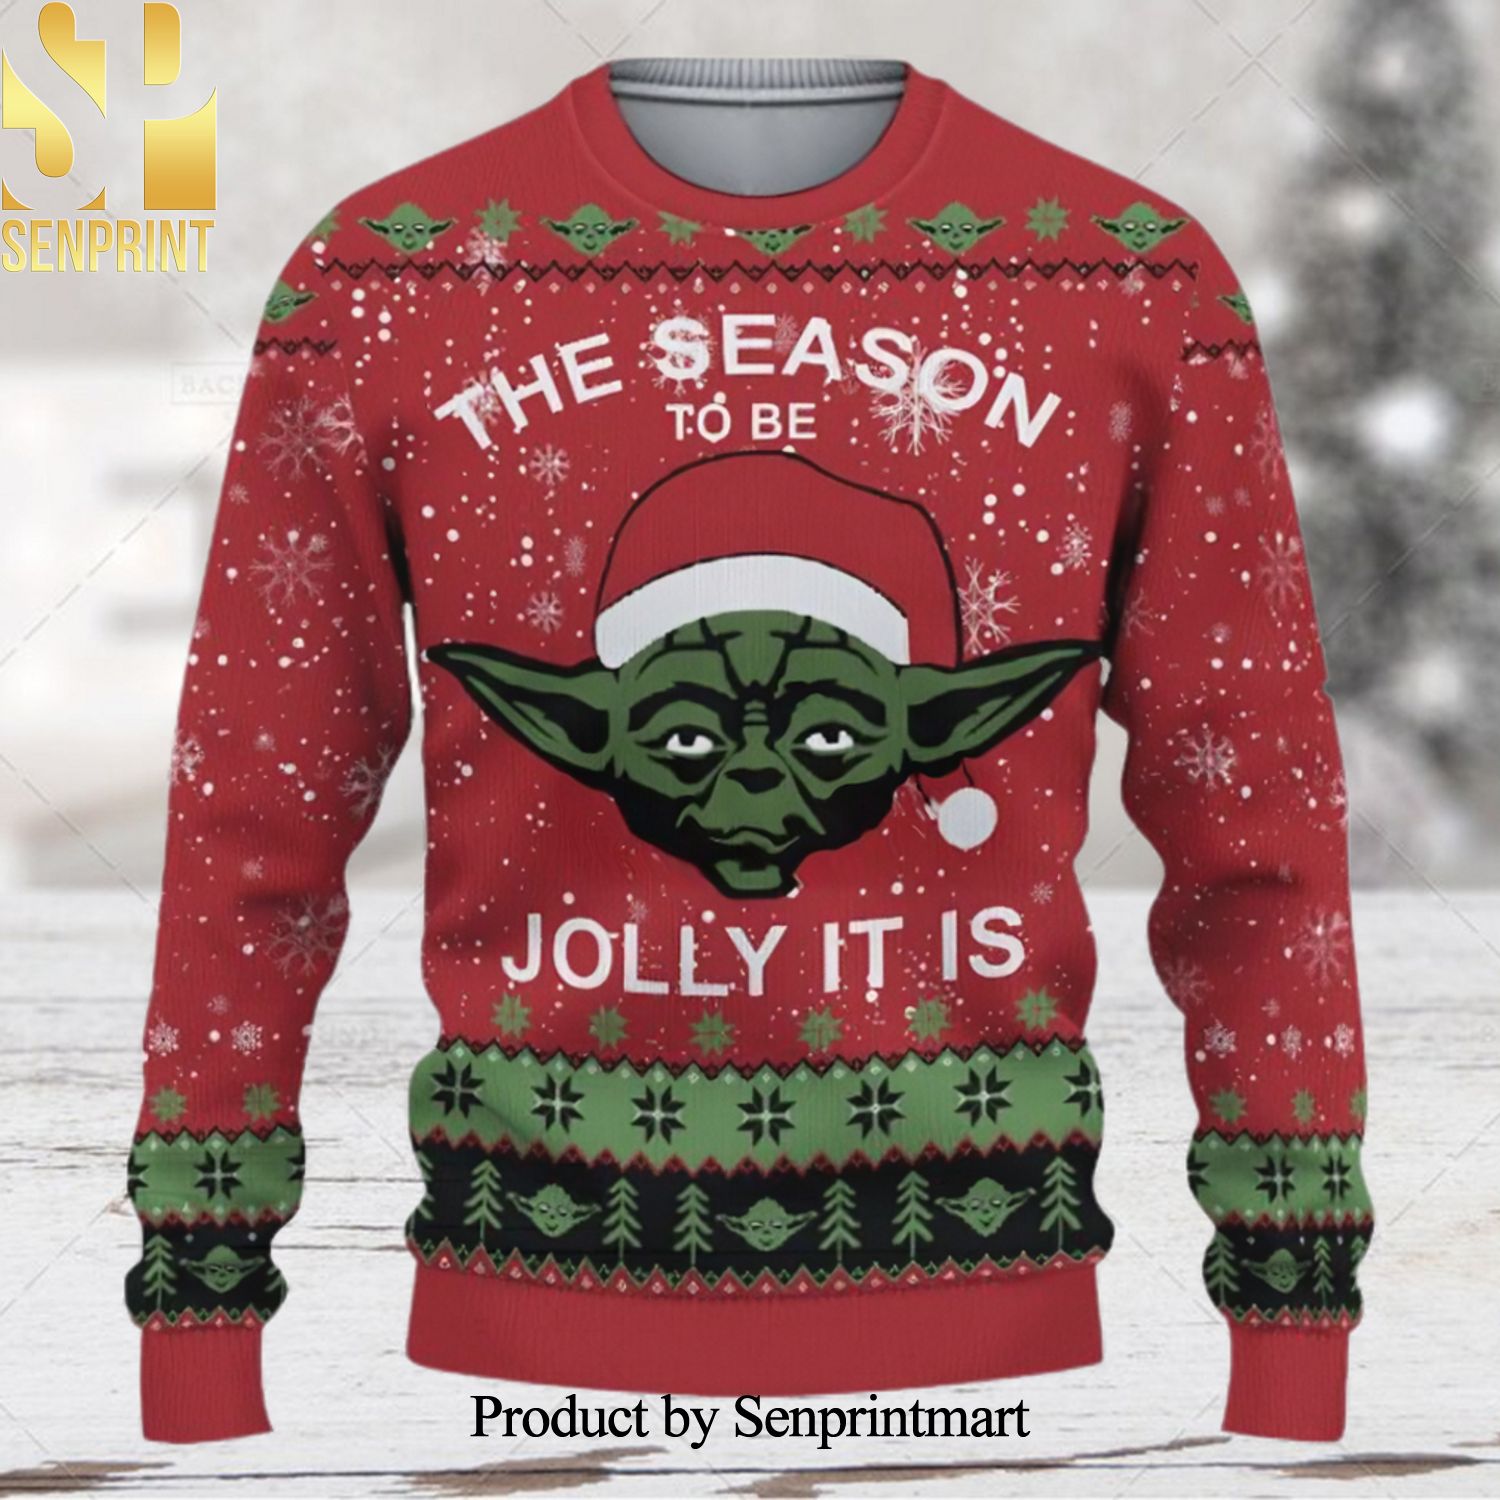 The Mandalorian Starwars The Season To Be Jolly It Is Ugly Christmas Sweater